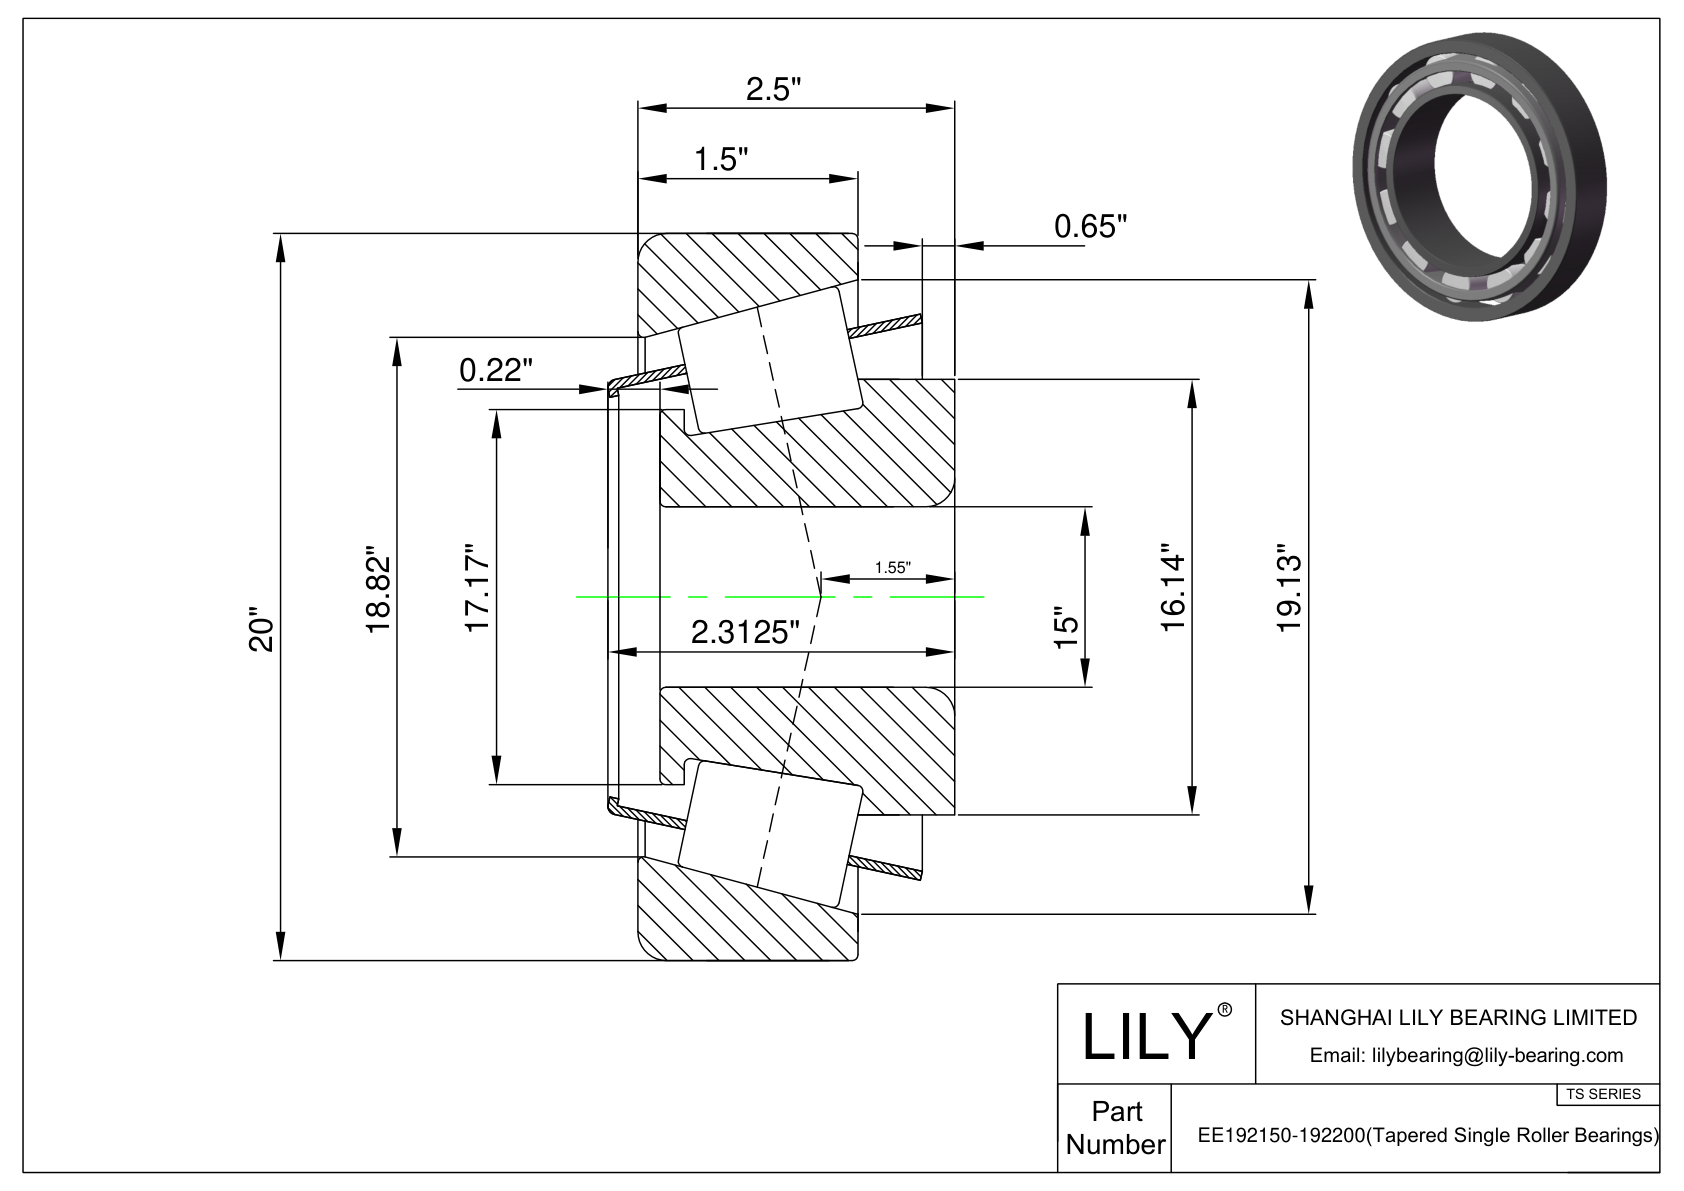 EE192150-192200 TS (Tapered Single Roller Bearings) (Imperial) cad drawing